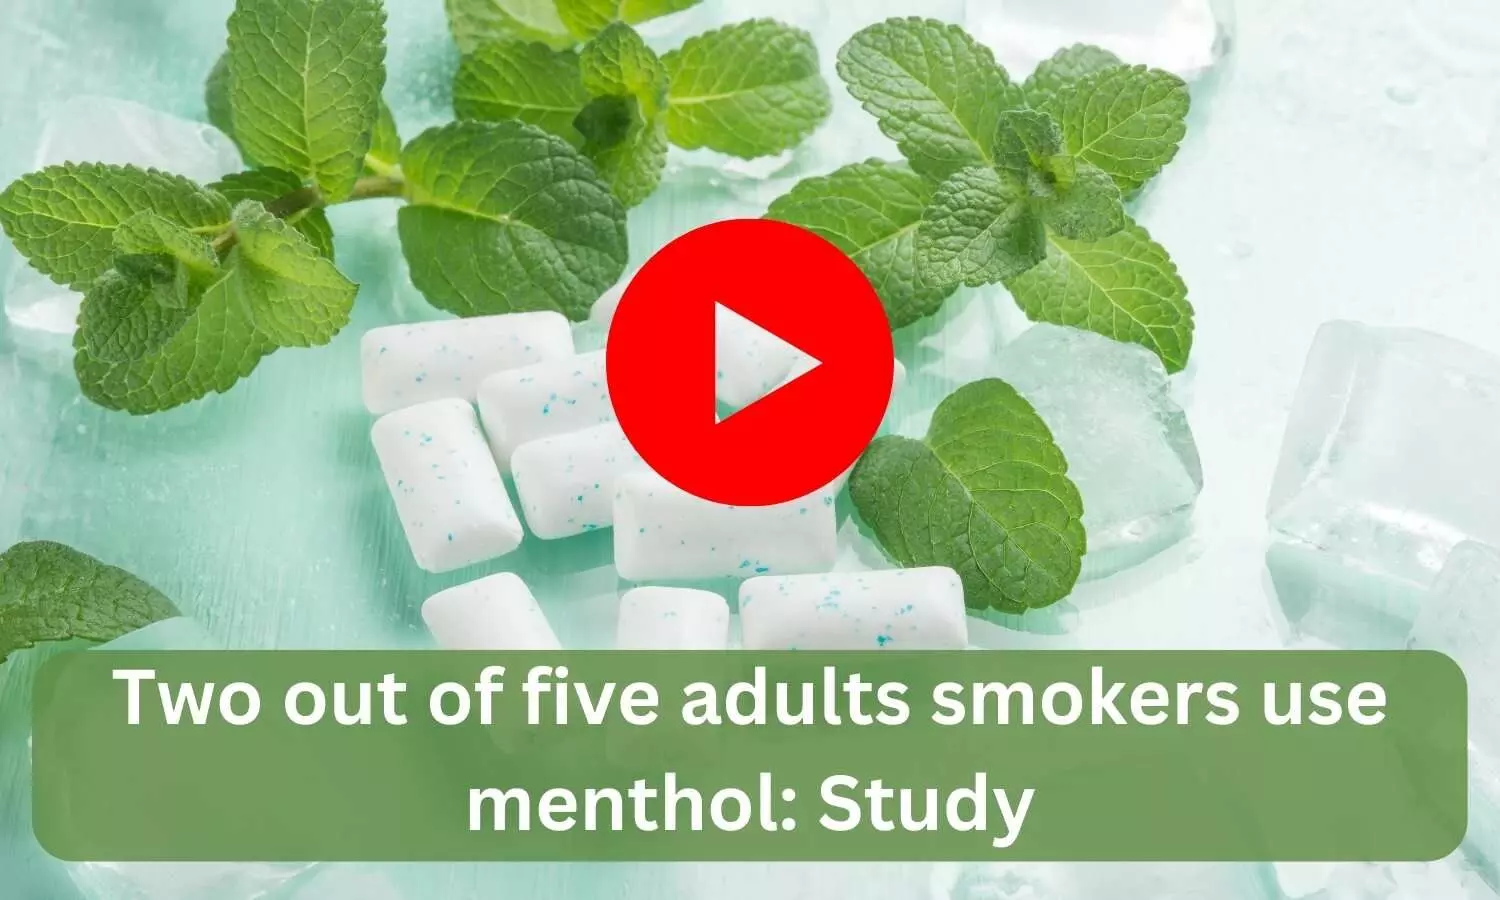 Two out of five adults smokers use menthol: Study